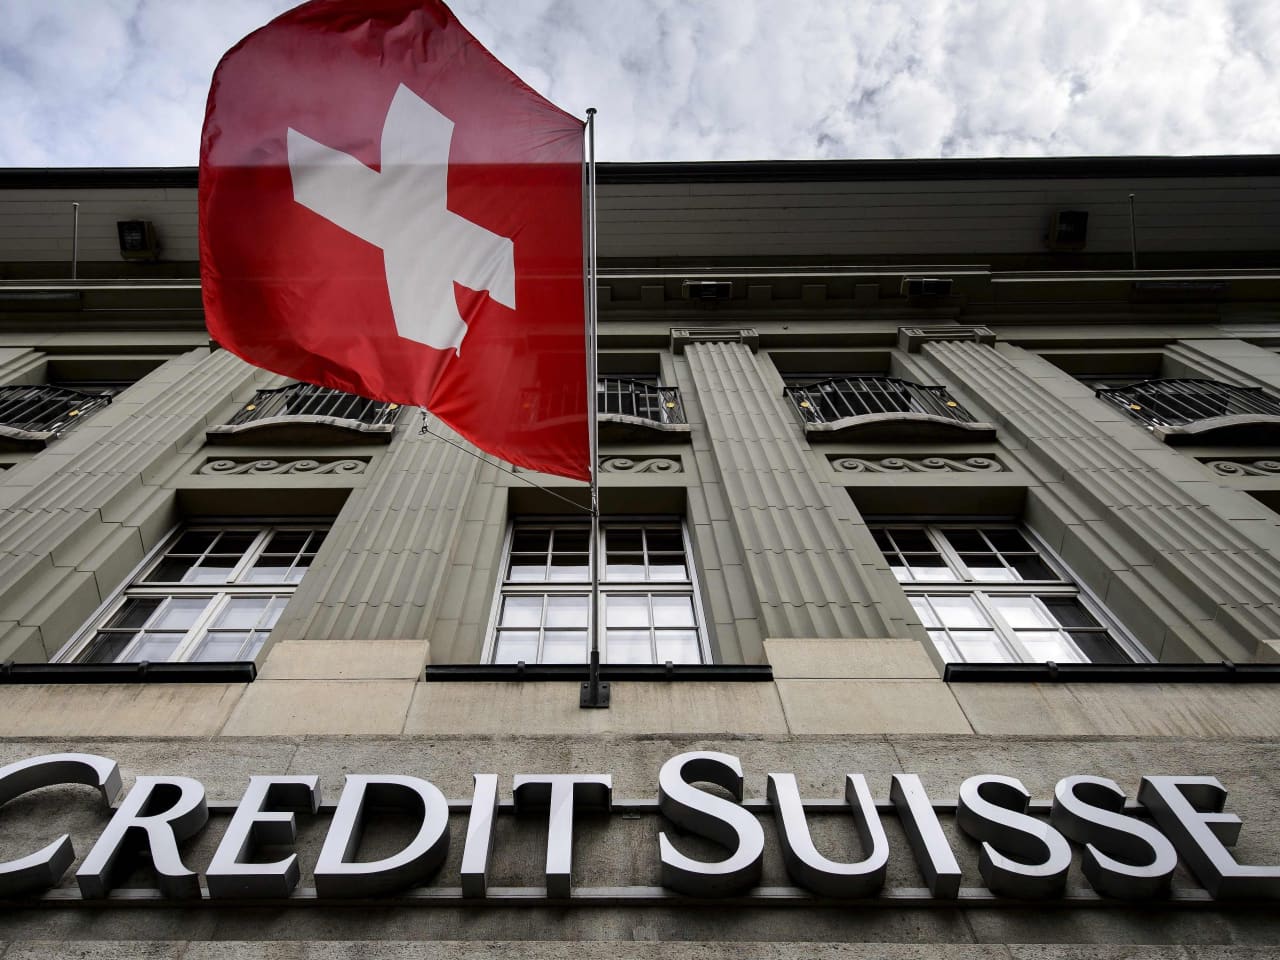 Credit Suisse shares tumble to new record low as European banking sector  reels - MarketWatch